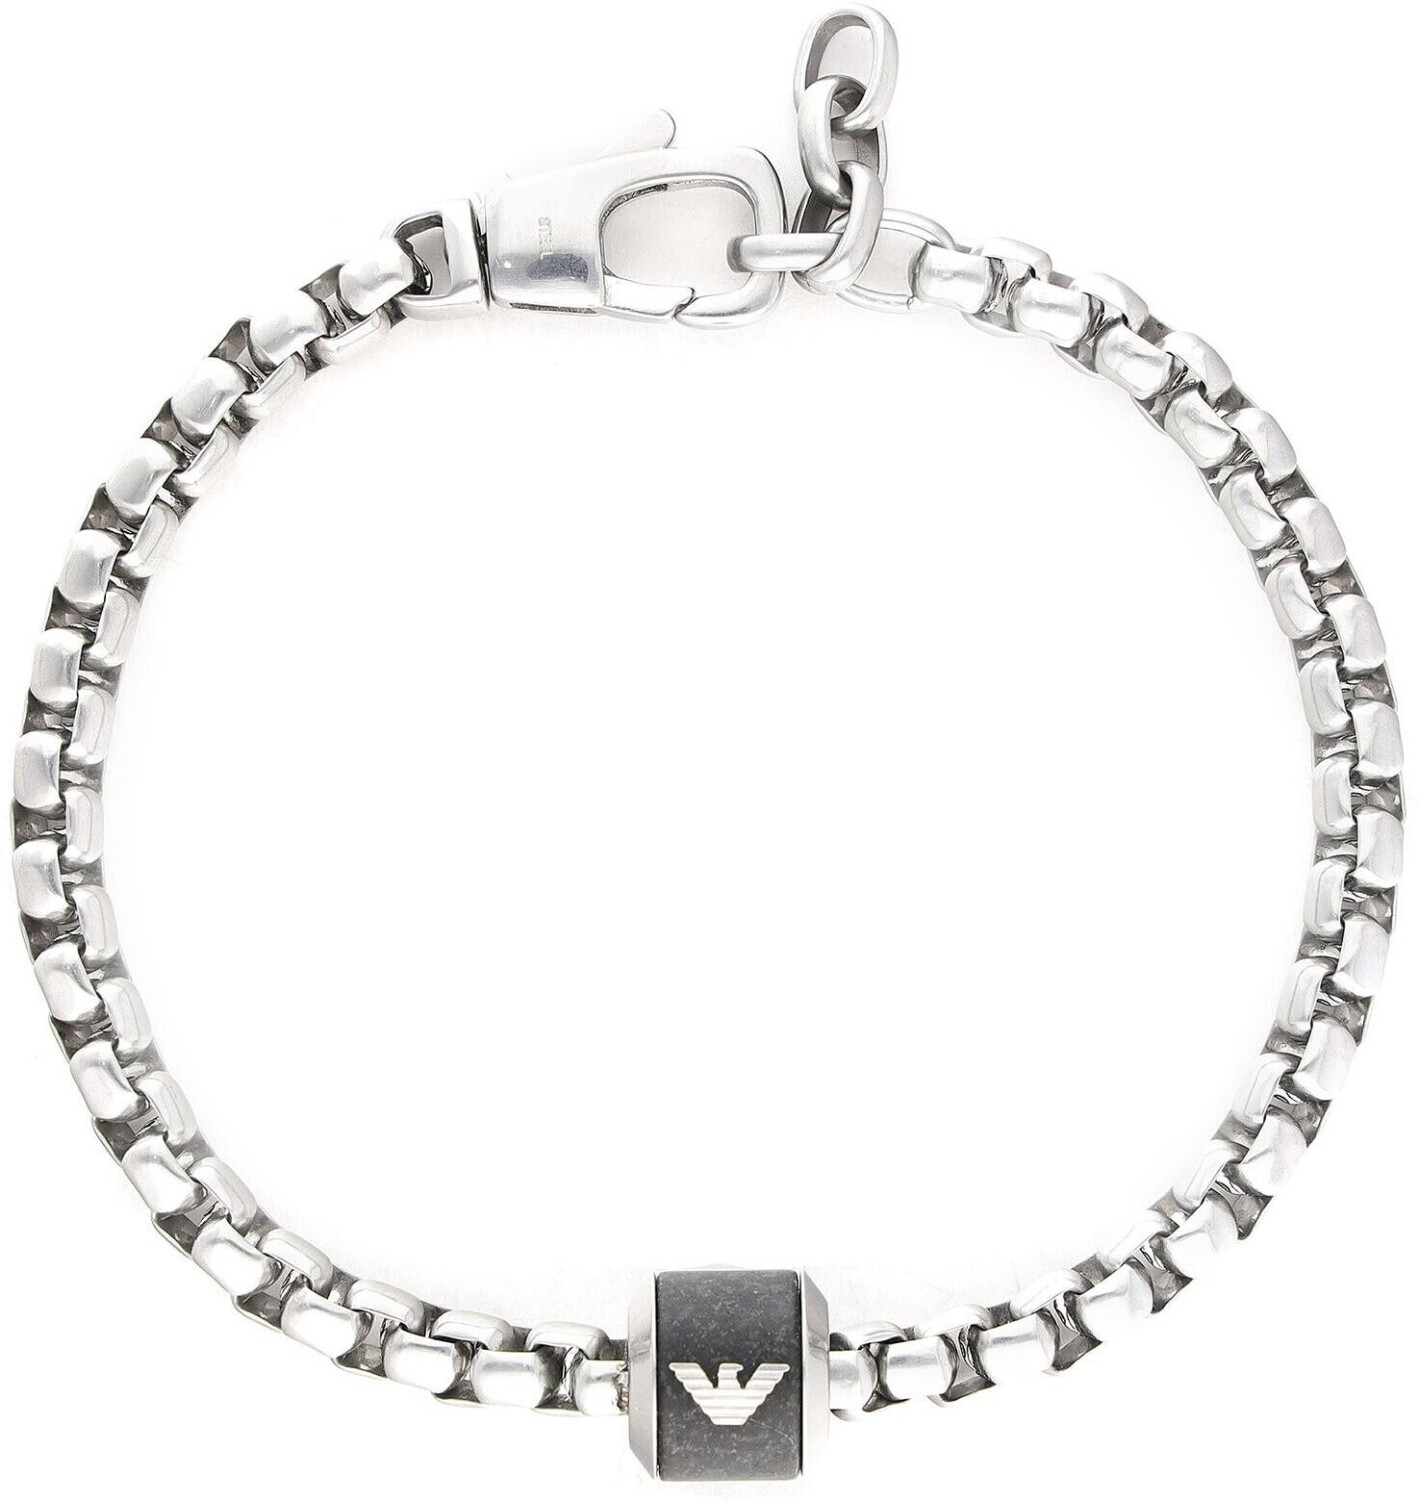 (EGS2911040) (Today) £77.76 Best from on Bracelet – Emporio Armani Buy Deals